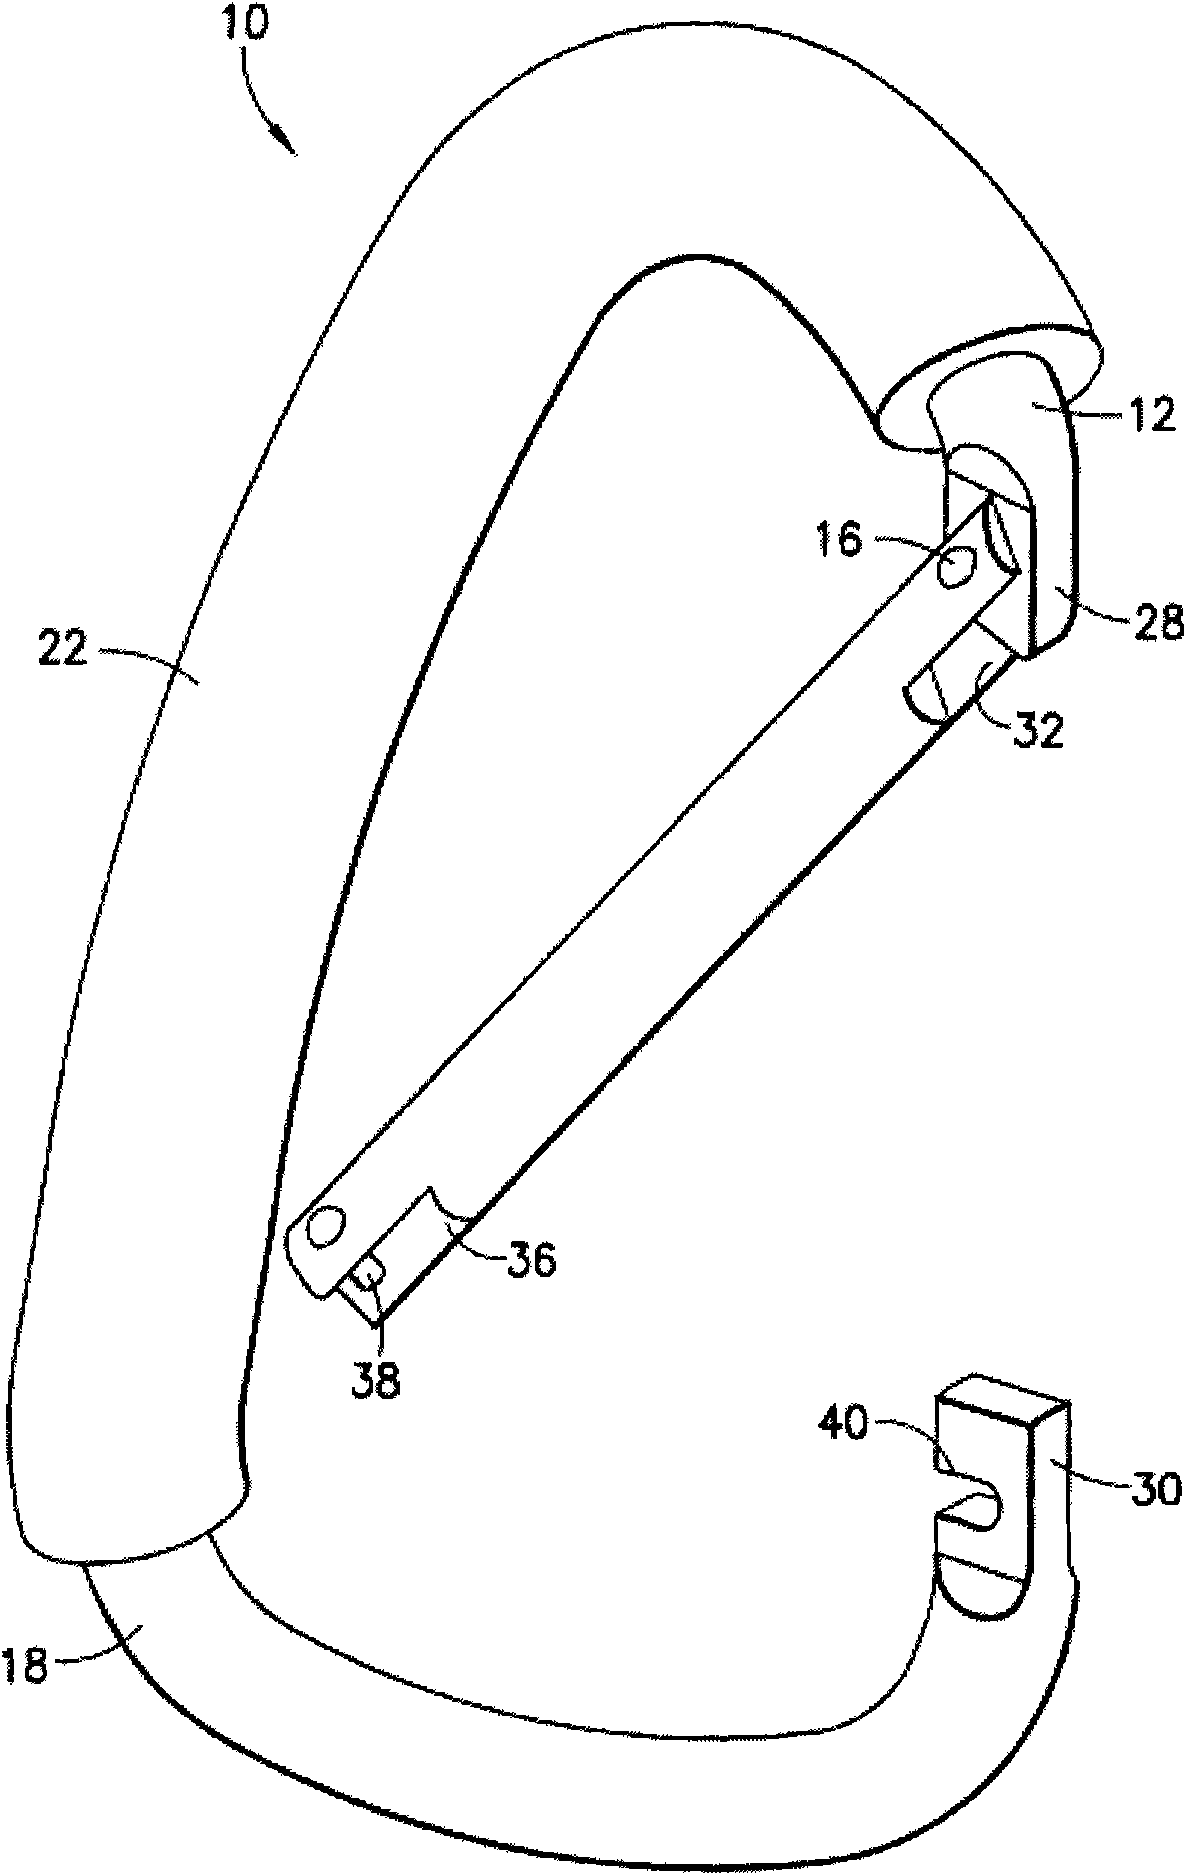 Carabiner with rubber sleeve